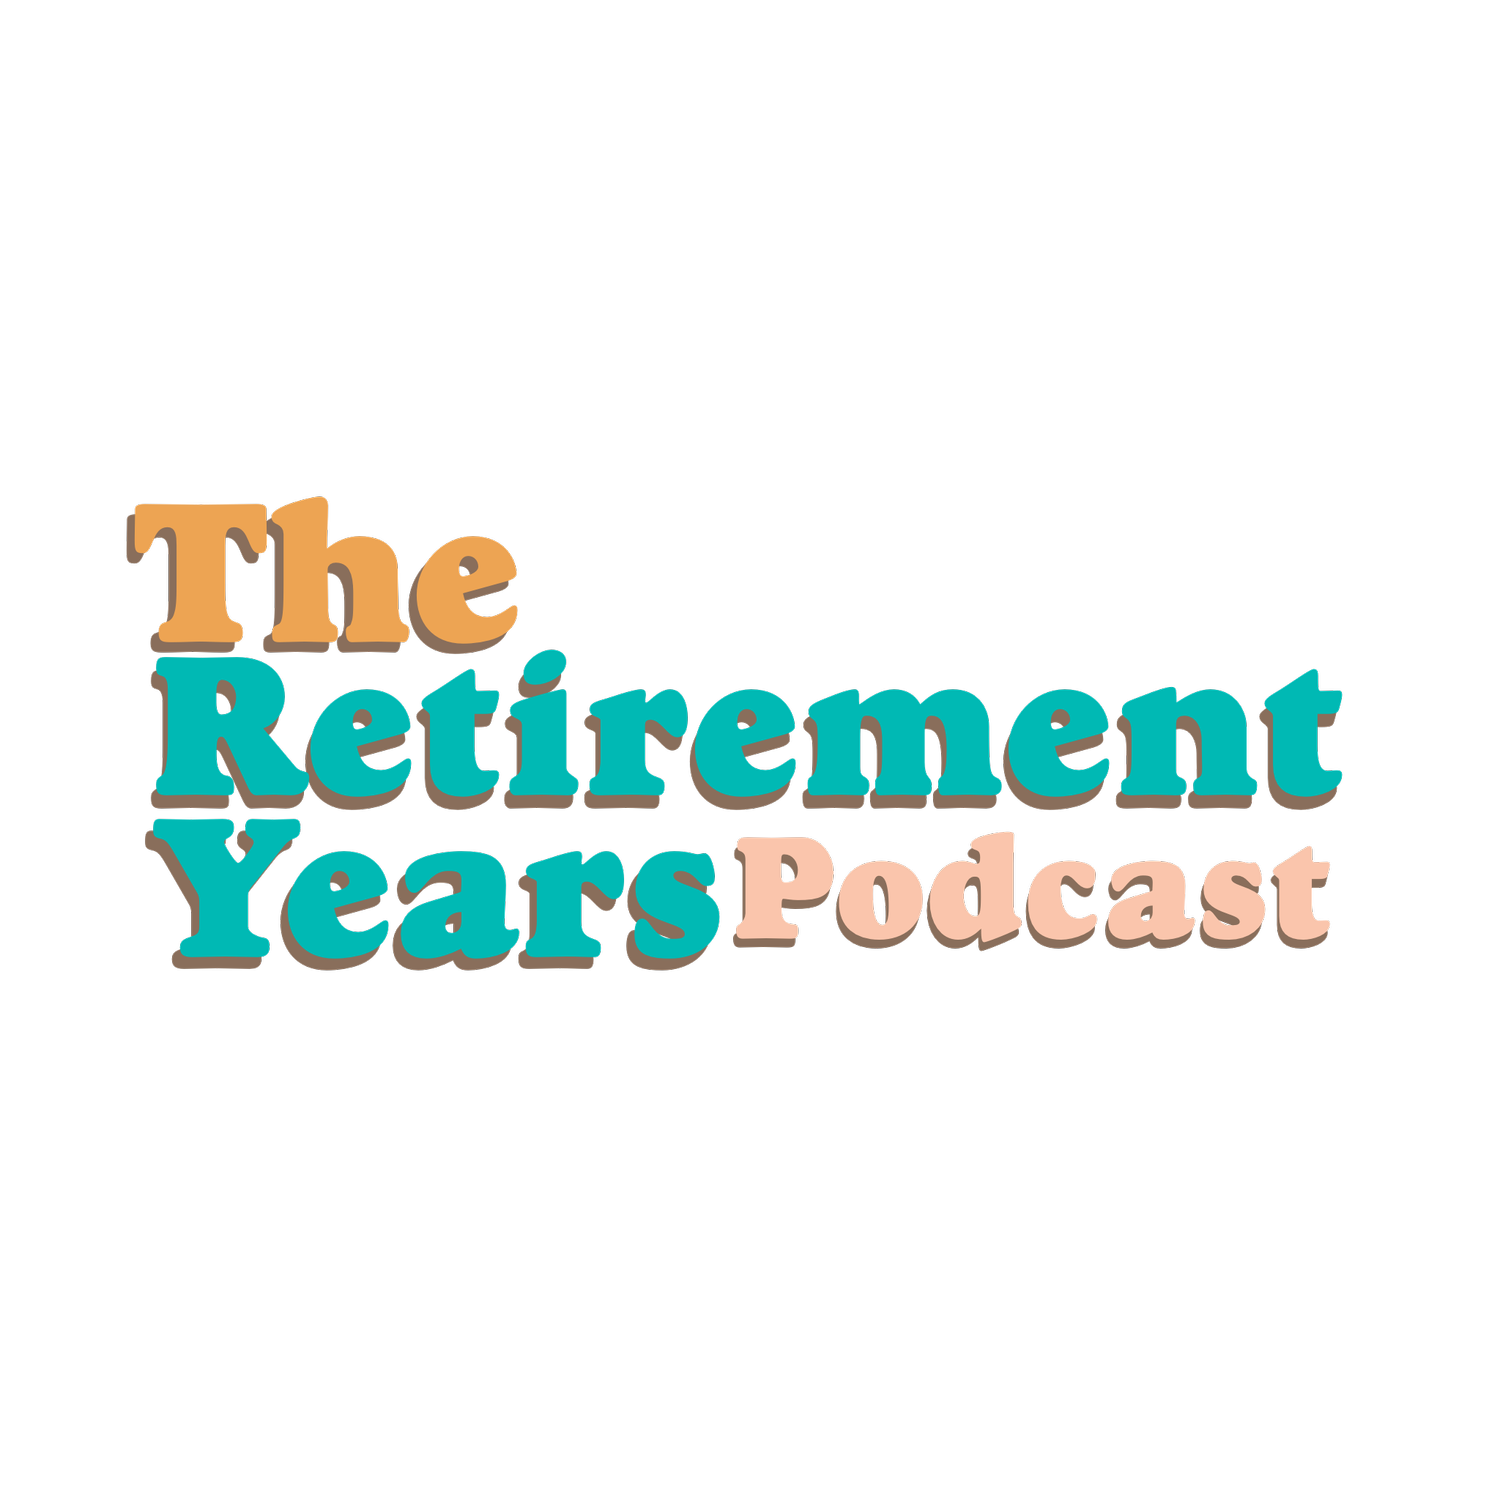 The Retirement Years Podcast